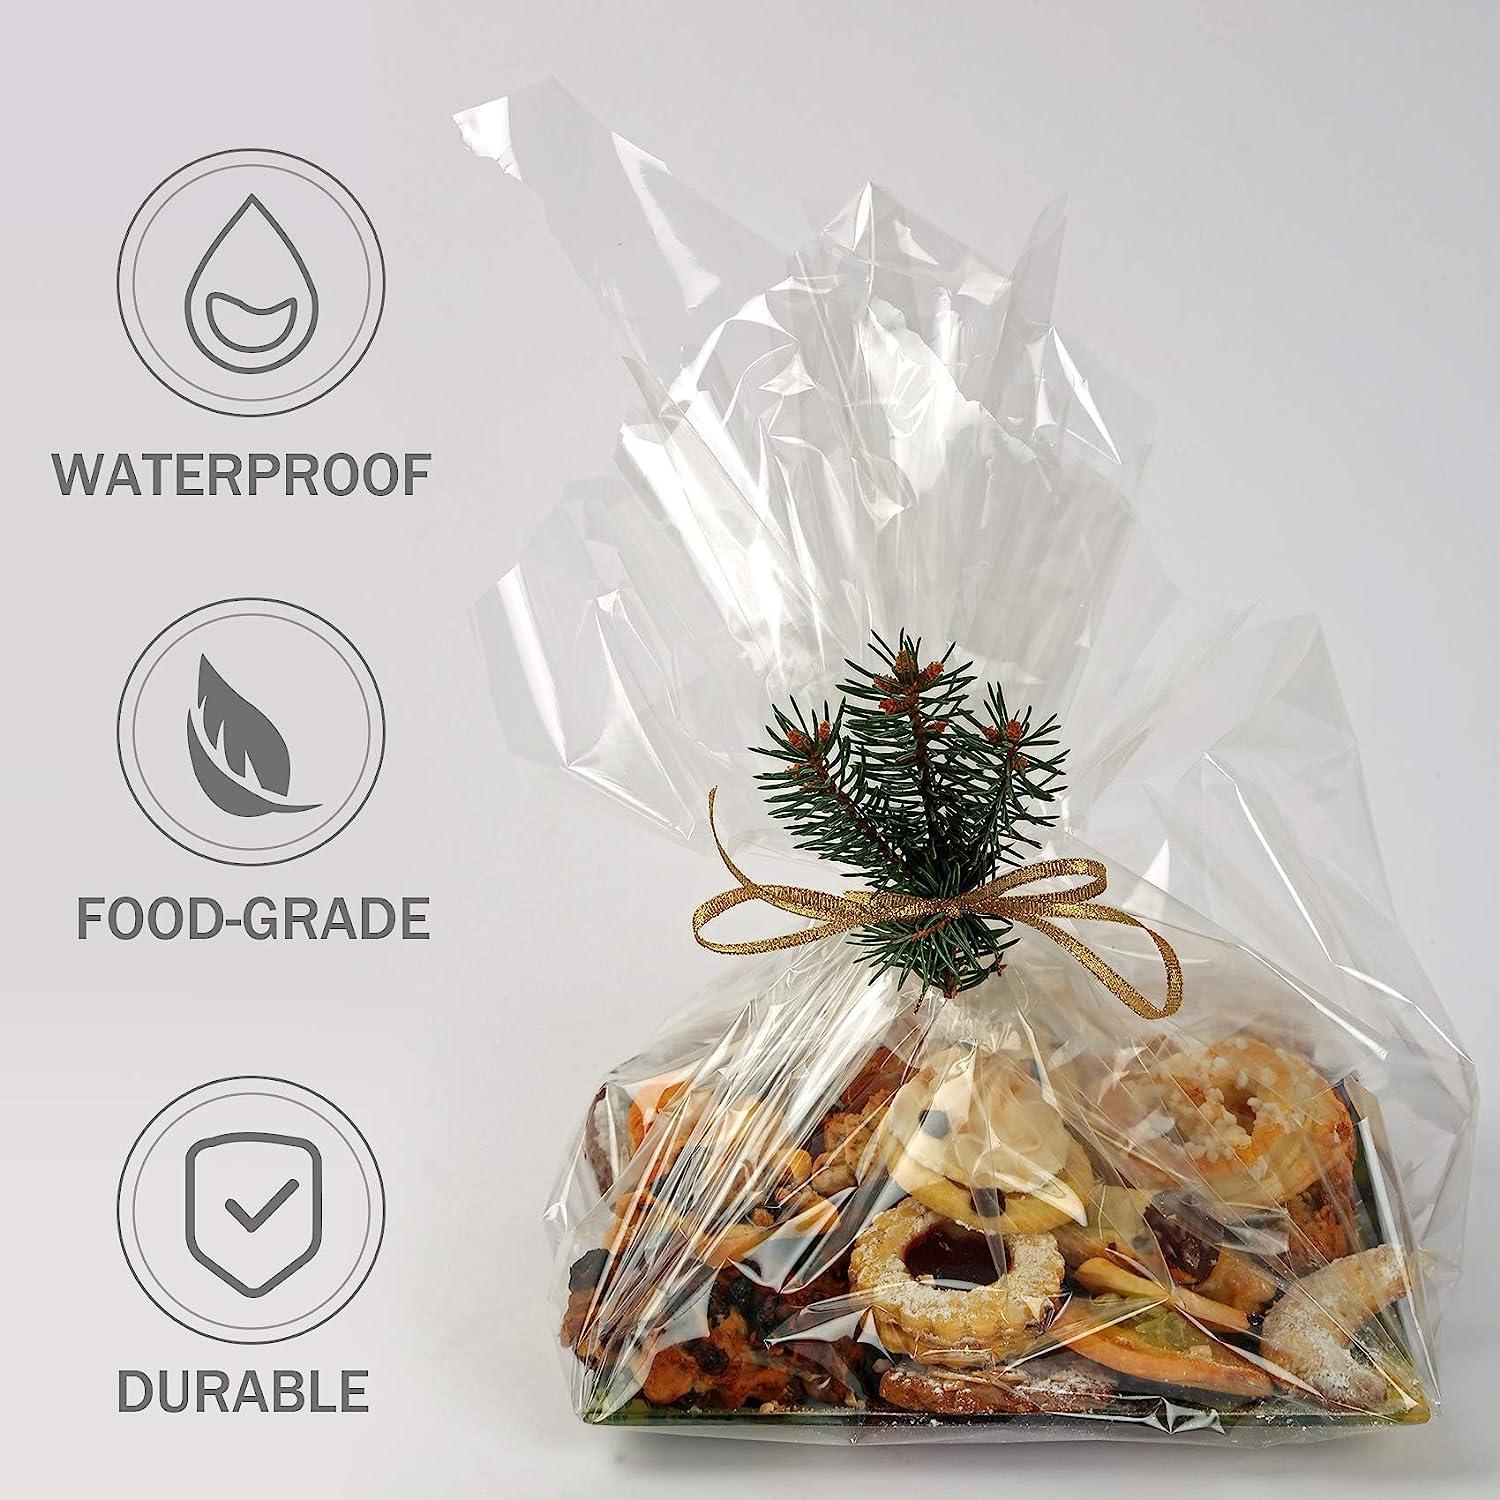  Morepack Extra Large Shrink Wrap Bags for Gift Baskets